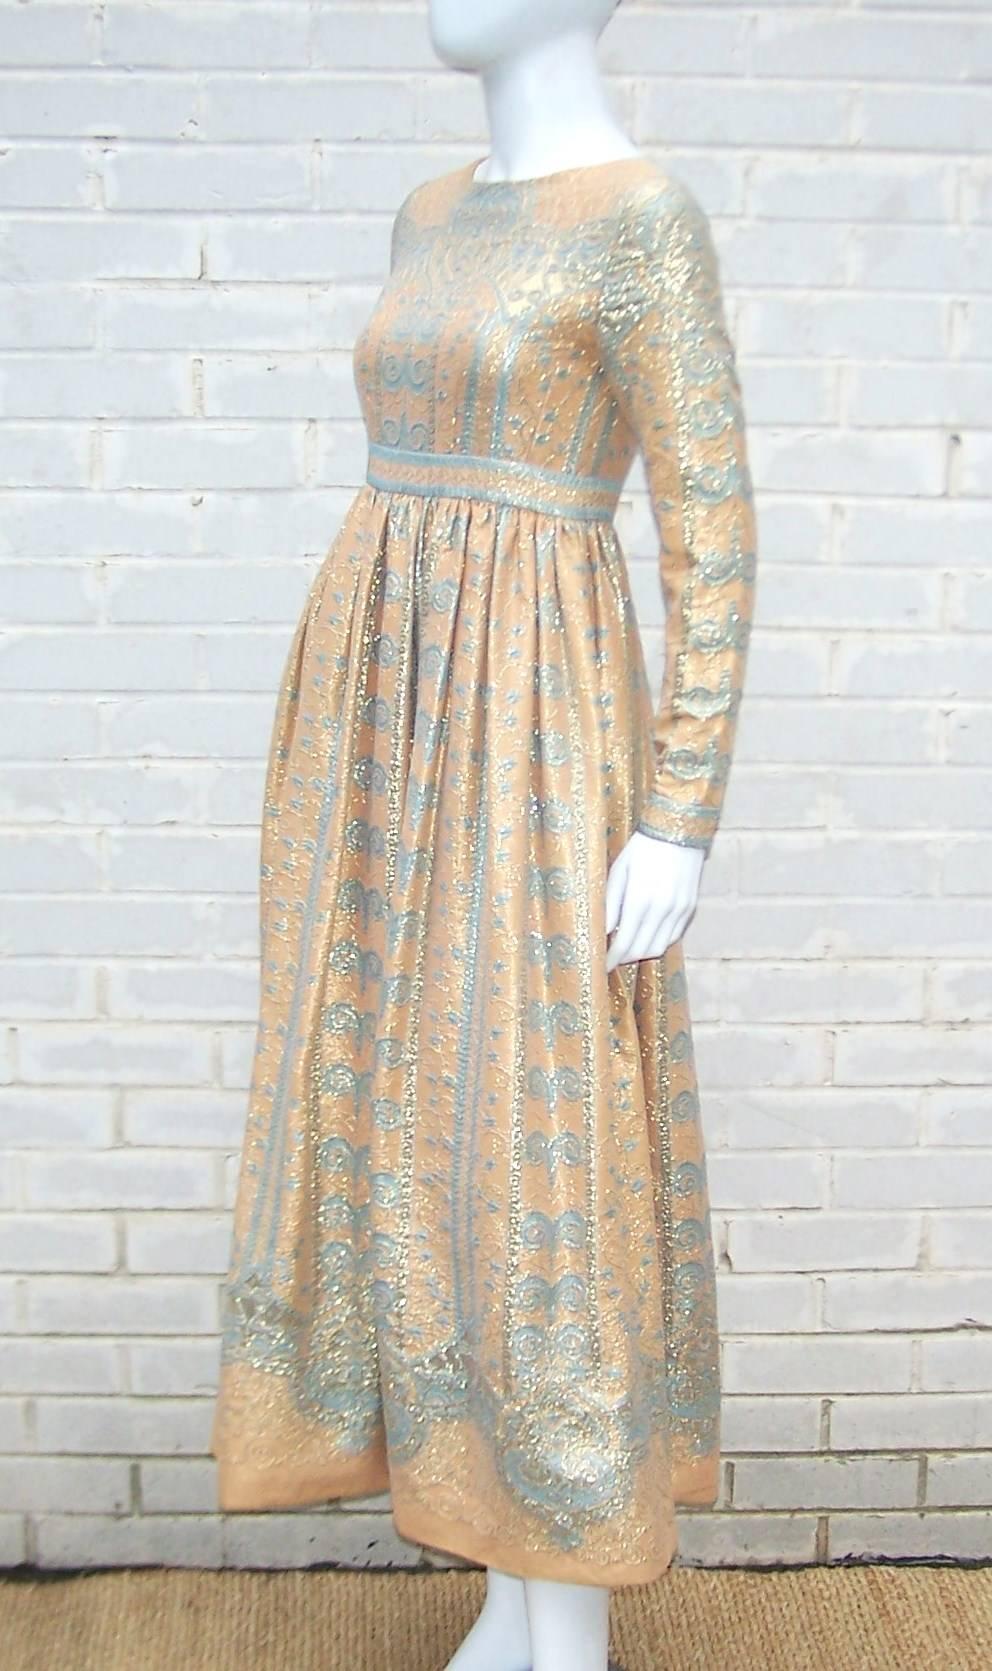 Gorgeous!  This Jeannene Booher designed dress for Jennifer is poetry in motion.  The exotic fabric creates a nude illusion effect by layering gold brocade with a light aqua blue design over a flesh-tone background.  The fabric is expertly nipped